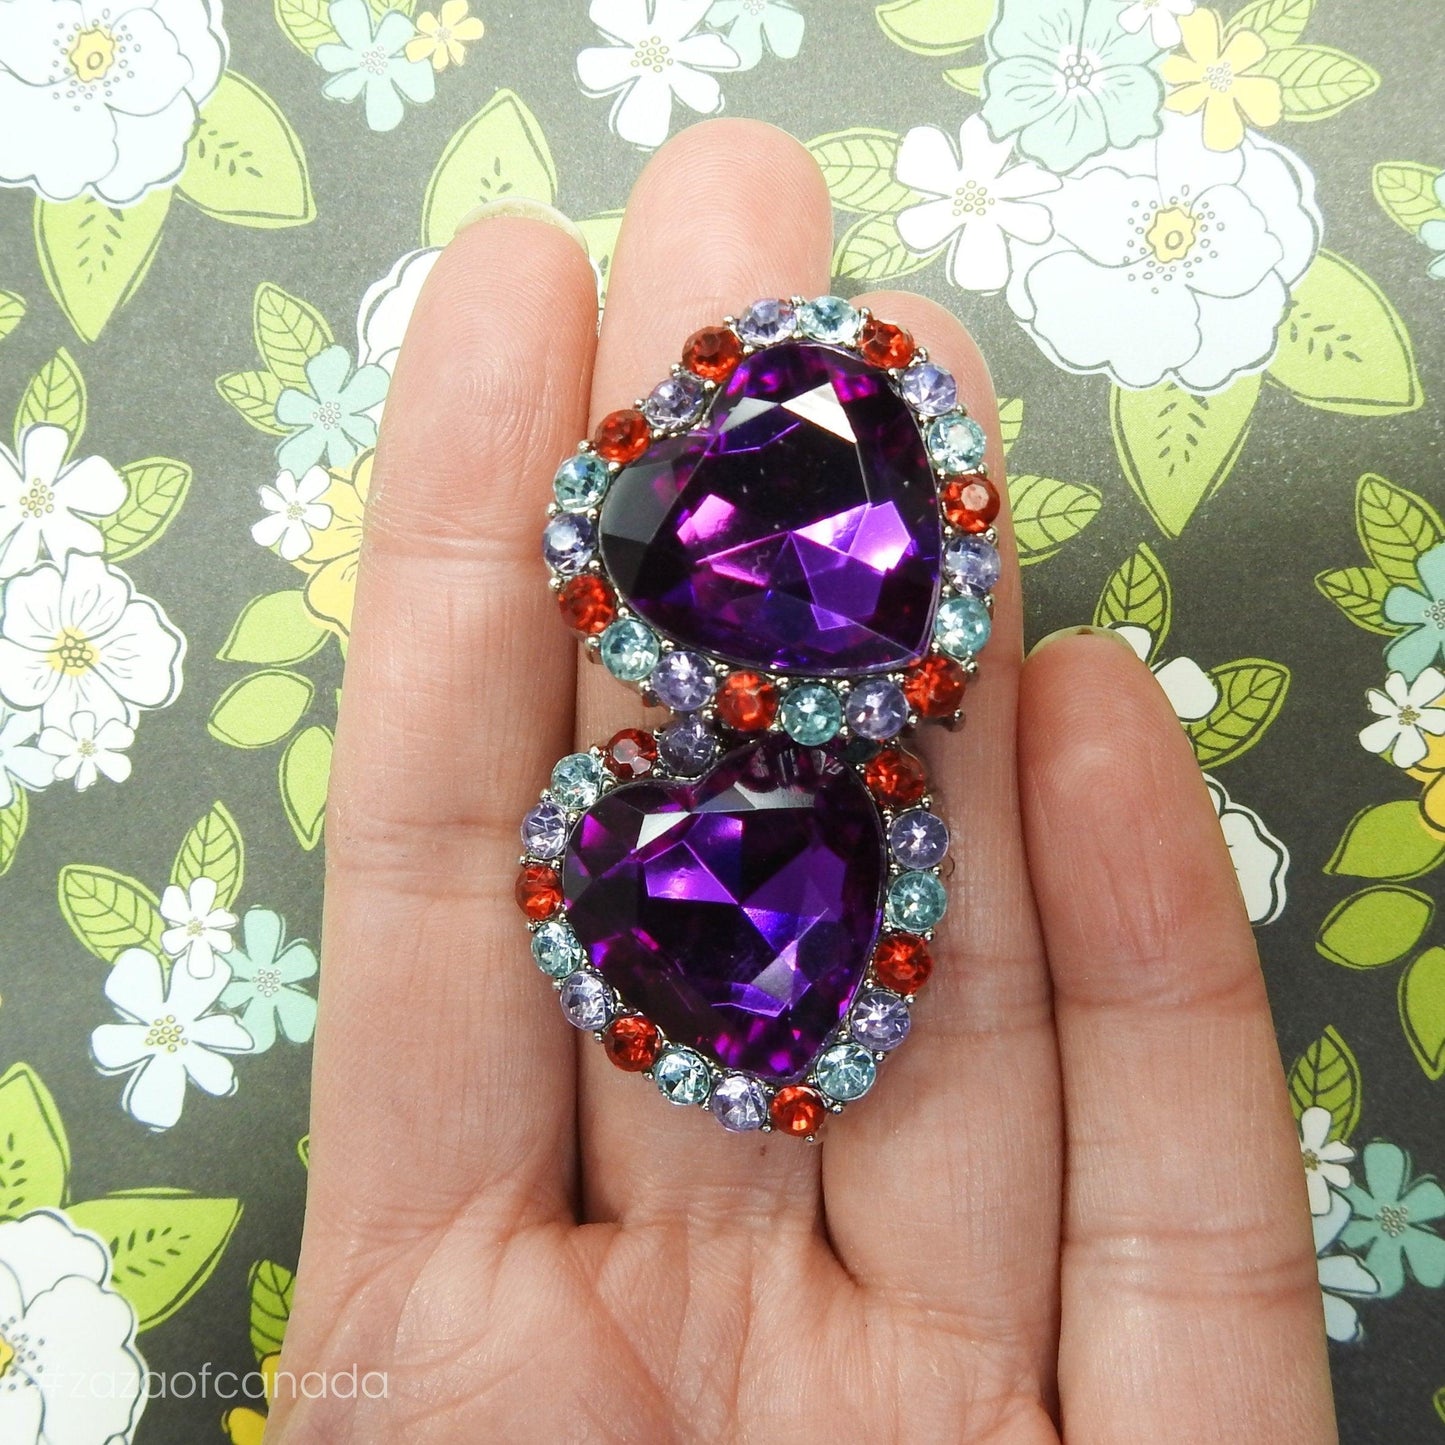 Rhinestone buttons purple heart, large and eye-catching - 30 mm - Lot of 2